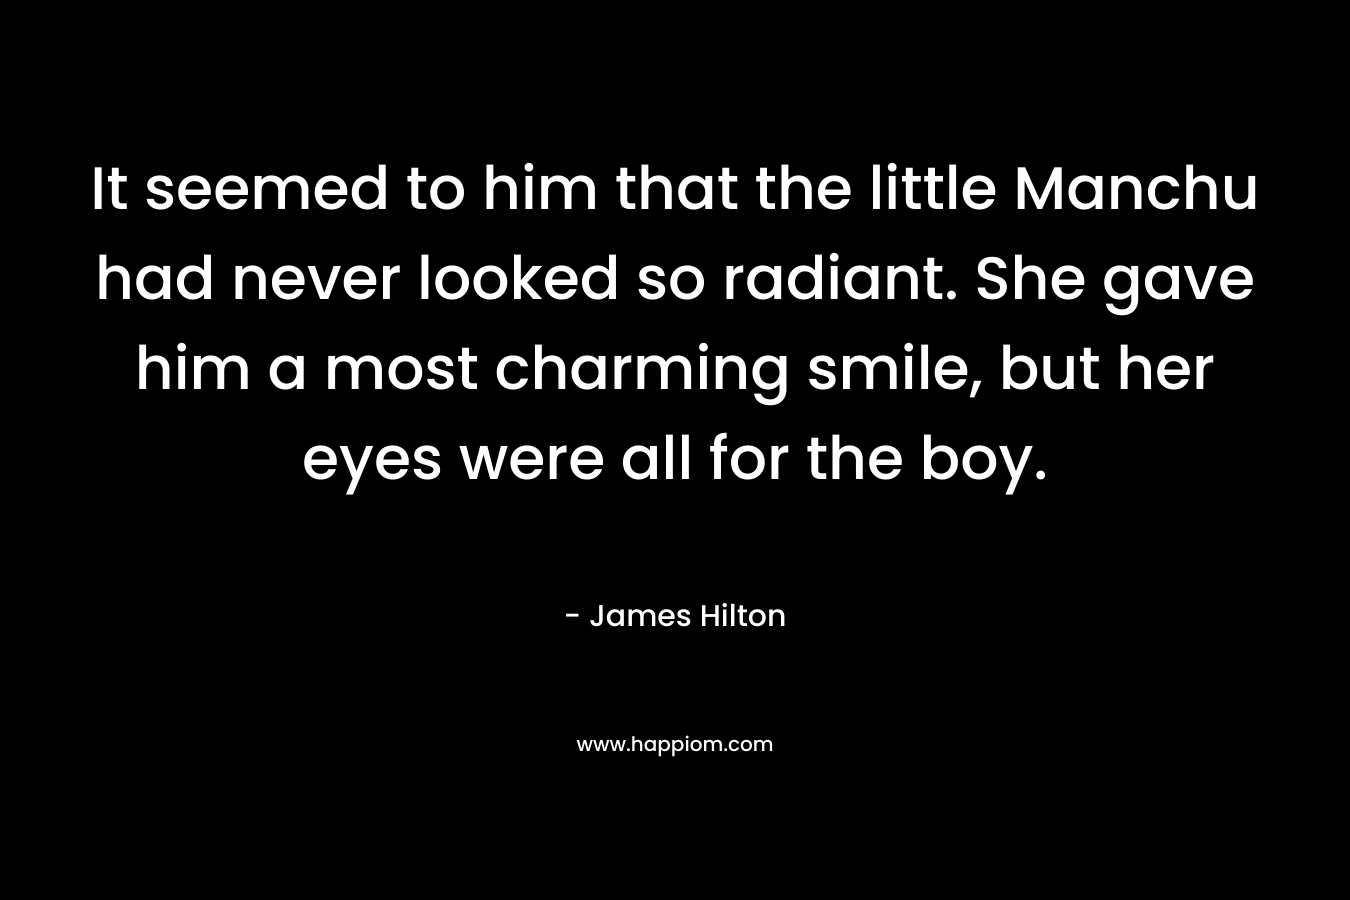 It seemed to him that the little Manchu had never looked so radiant. She gave him a most charming smile, but her eyes were all for the boy. – James Hilton